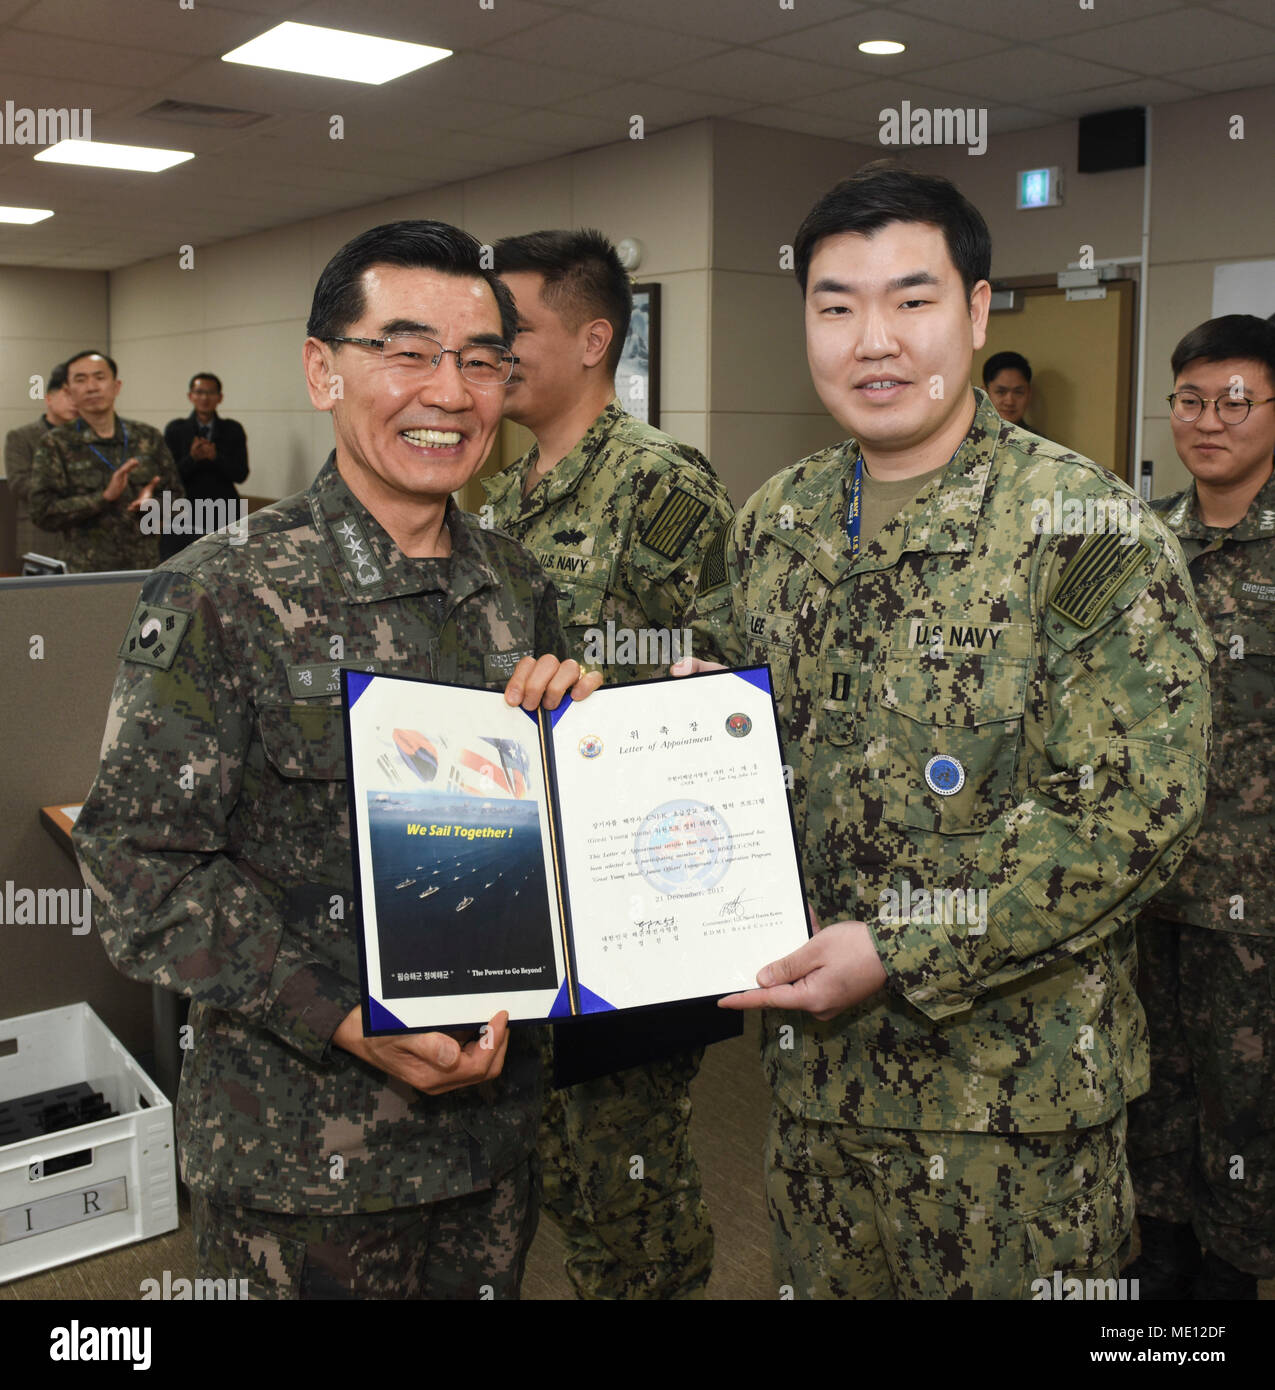 171221-N-TB148-012 BUSAN, Republic of Korea (Dec. 21, 2017) Republic of Korea (ROK) Navy Vice Adm. Jung, Jin-Sup, commander, ROK Fleet, presents Lt. John Lee with a letter of appointment for his selection to the 'Great Young Minds' Junior Officers' Engagement and Cooperation Program. The 'Great Young Minds' initiative brings together hand-selected, young officers from the ROK and U.S. navies and challenges them to develop innovative solutions to further enhance the ROK -U.S. alliance of the future. (U.S. Navy photo by Mass Communication Specialist Seaman William Carlisle) Stock Photo